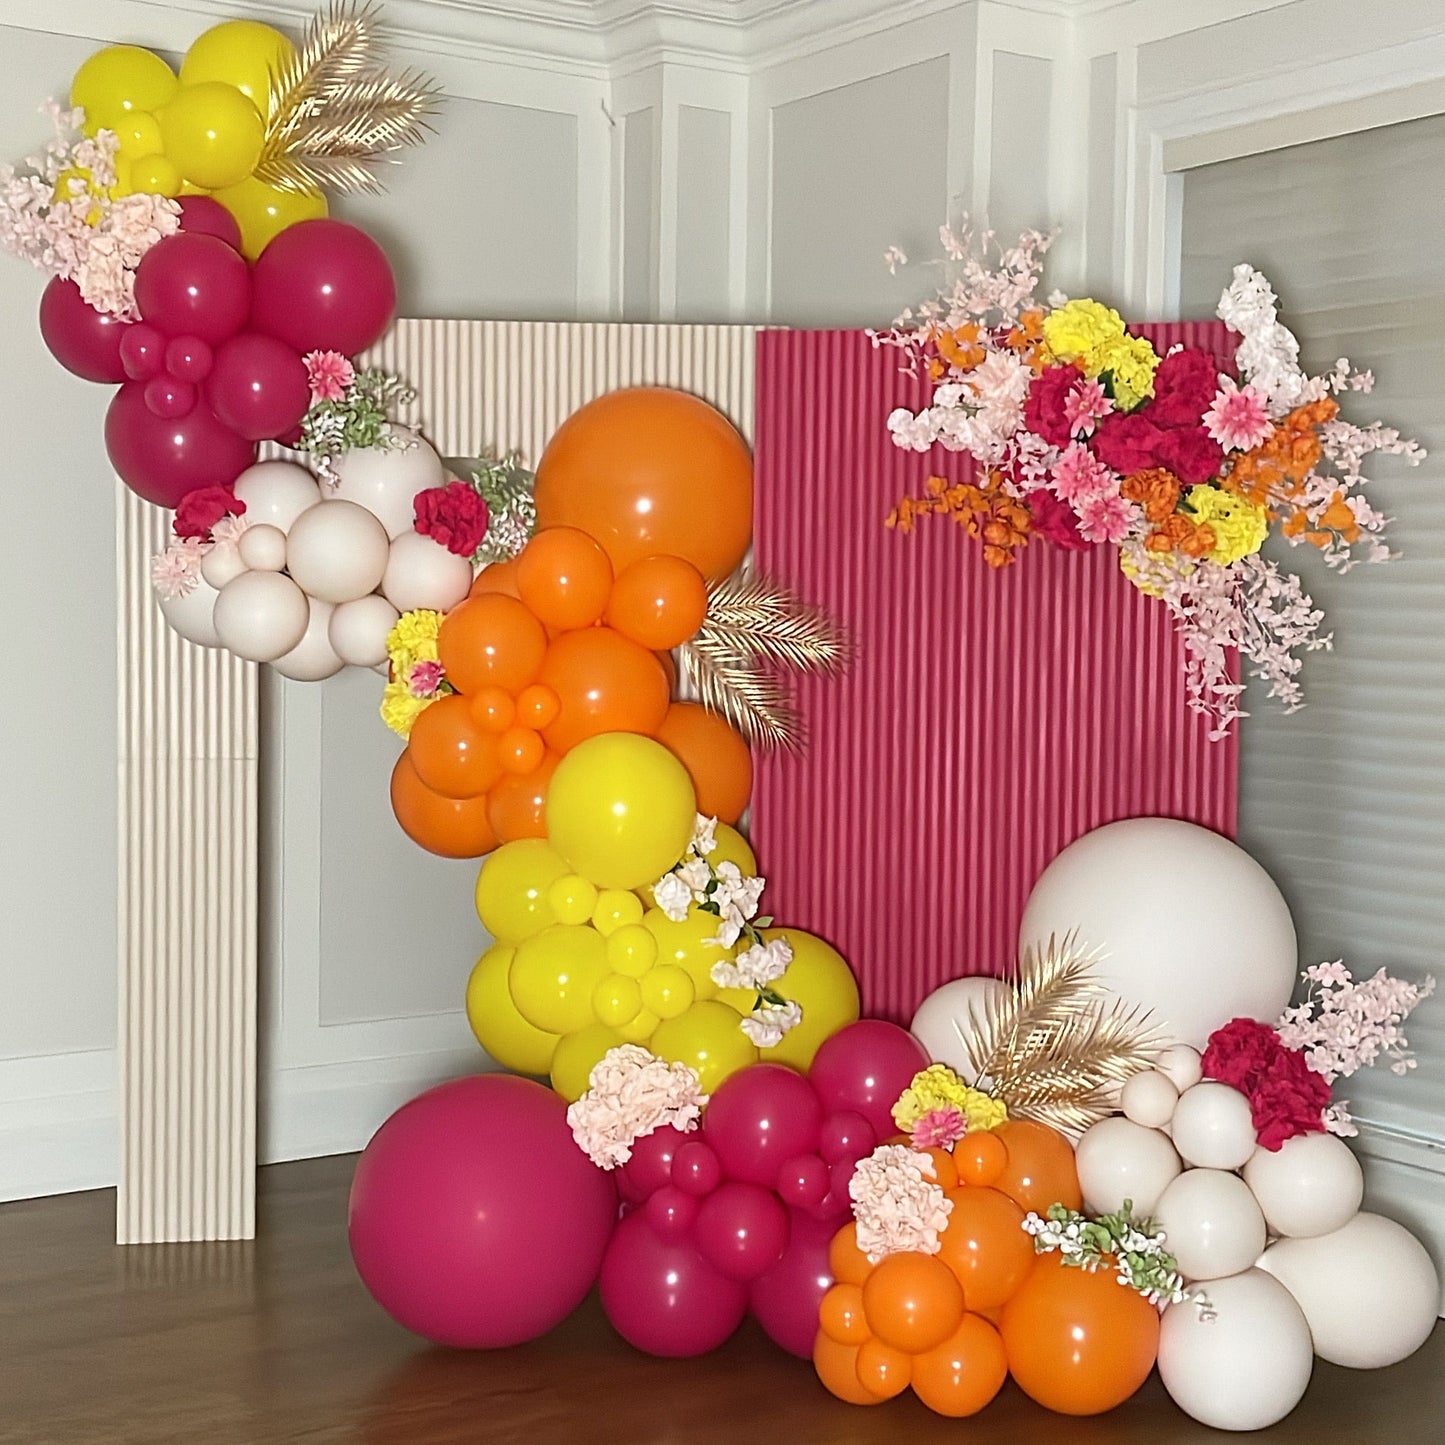 2 RIPPLE BACKDROPS WITH BALLOONS AND FLORAL STARTING AT $900